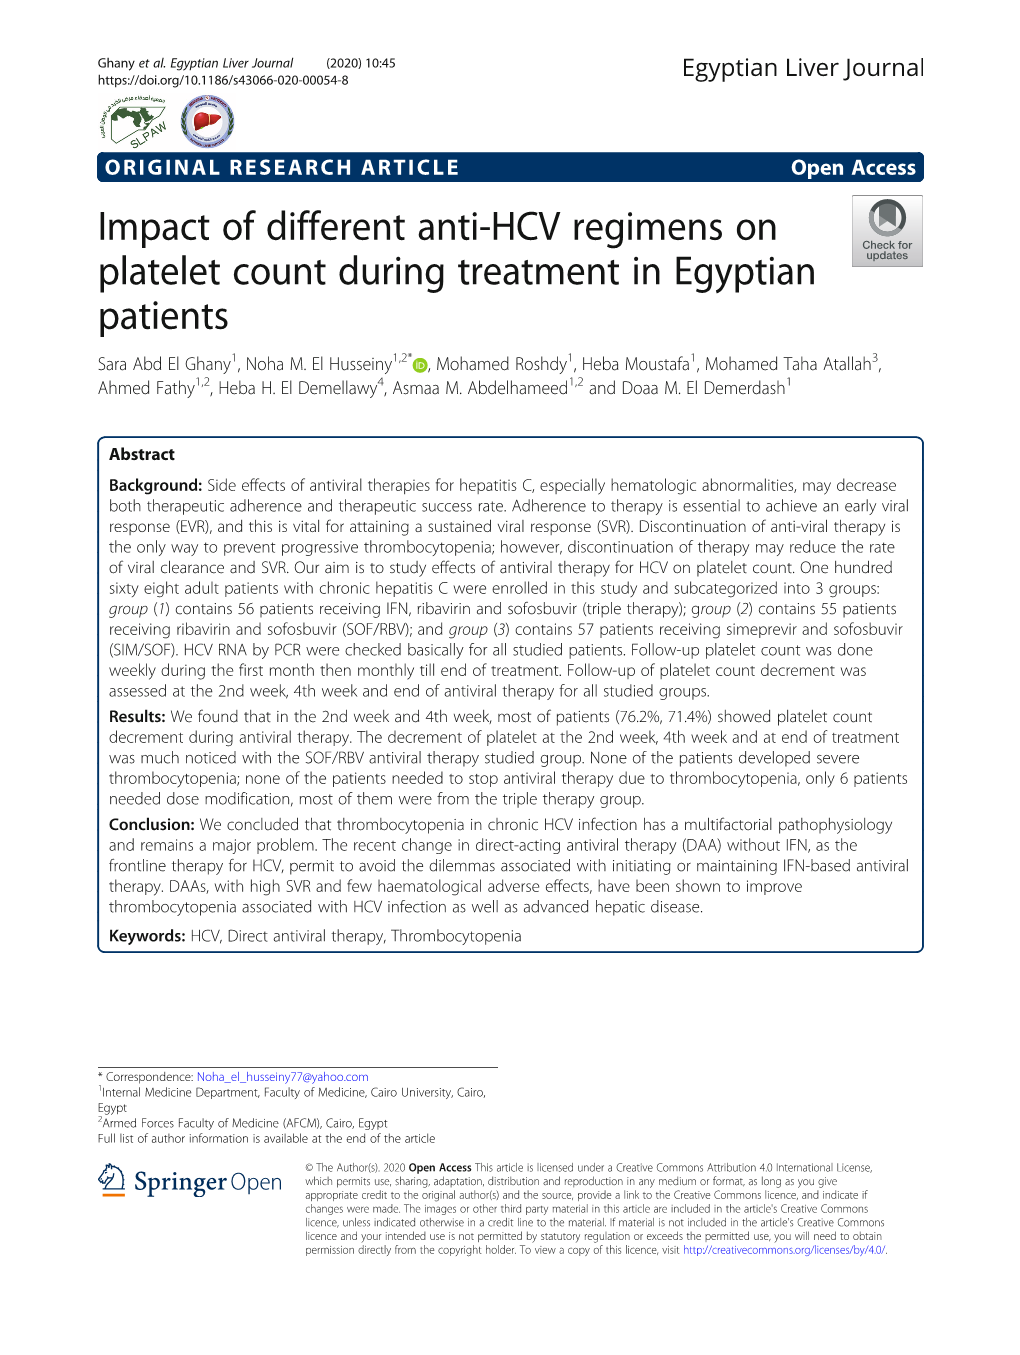 Impact of Different Anti-HCV Regimens on Platelet Count During Treatment in Egyptian Patients Sara Abd El Ghany1, Noha M